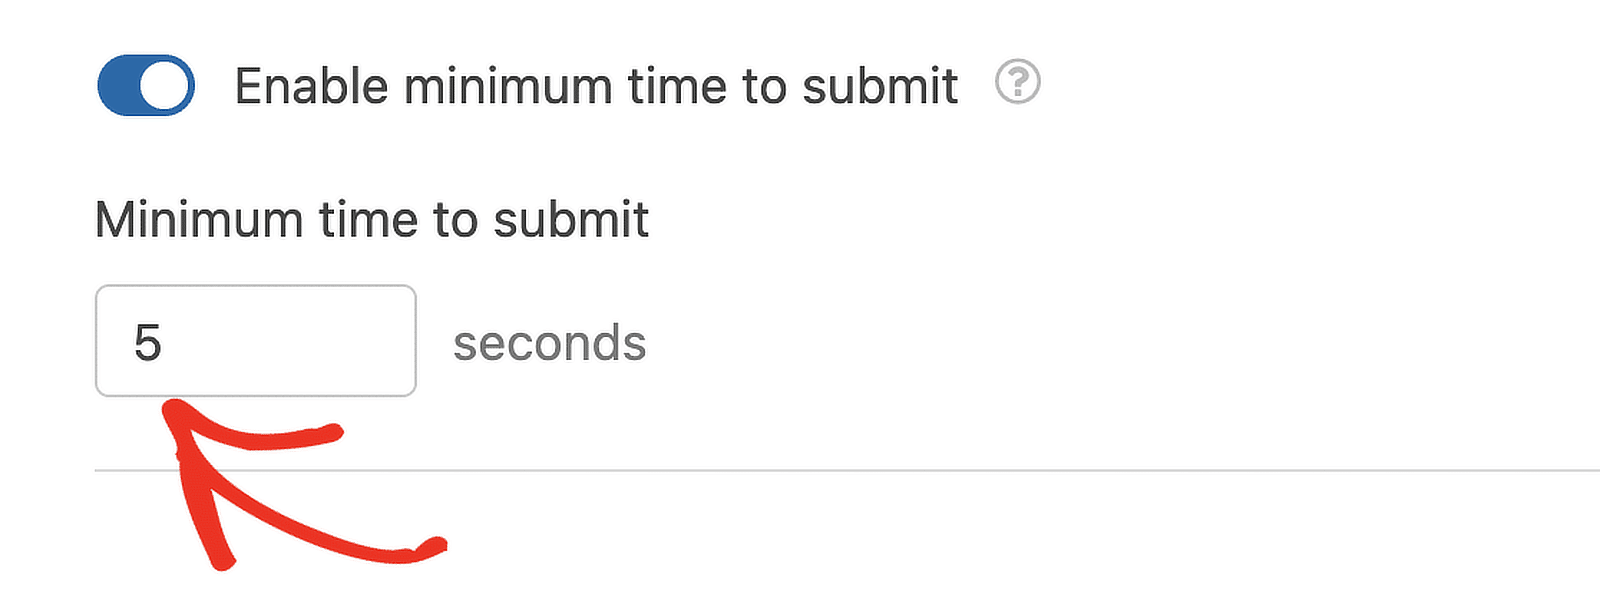 minimum time to submit timer